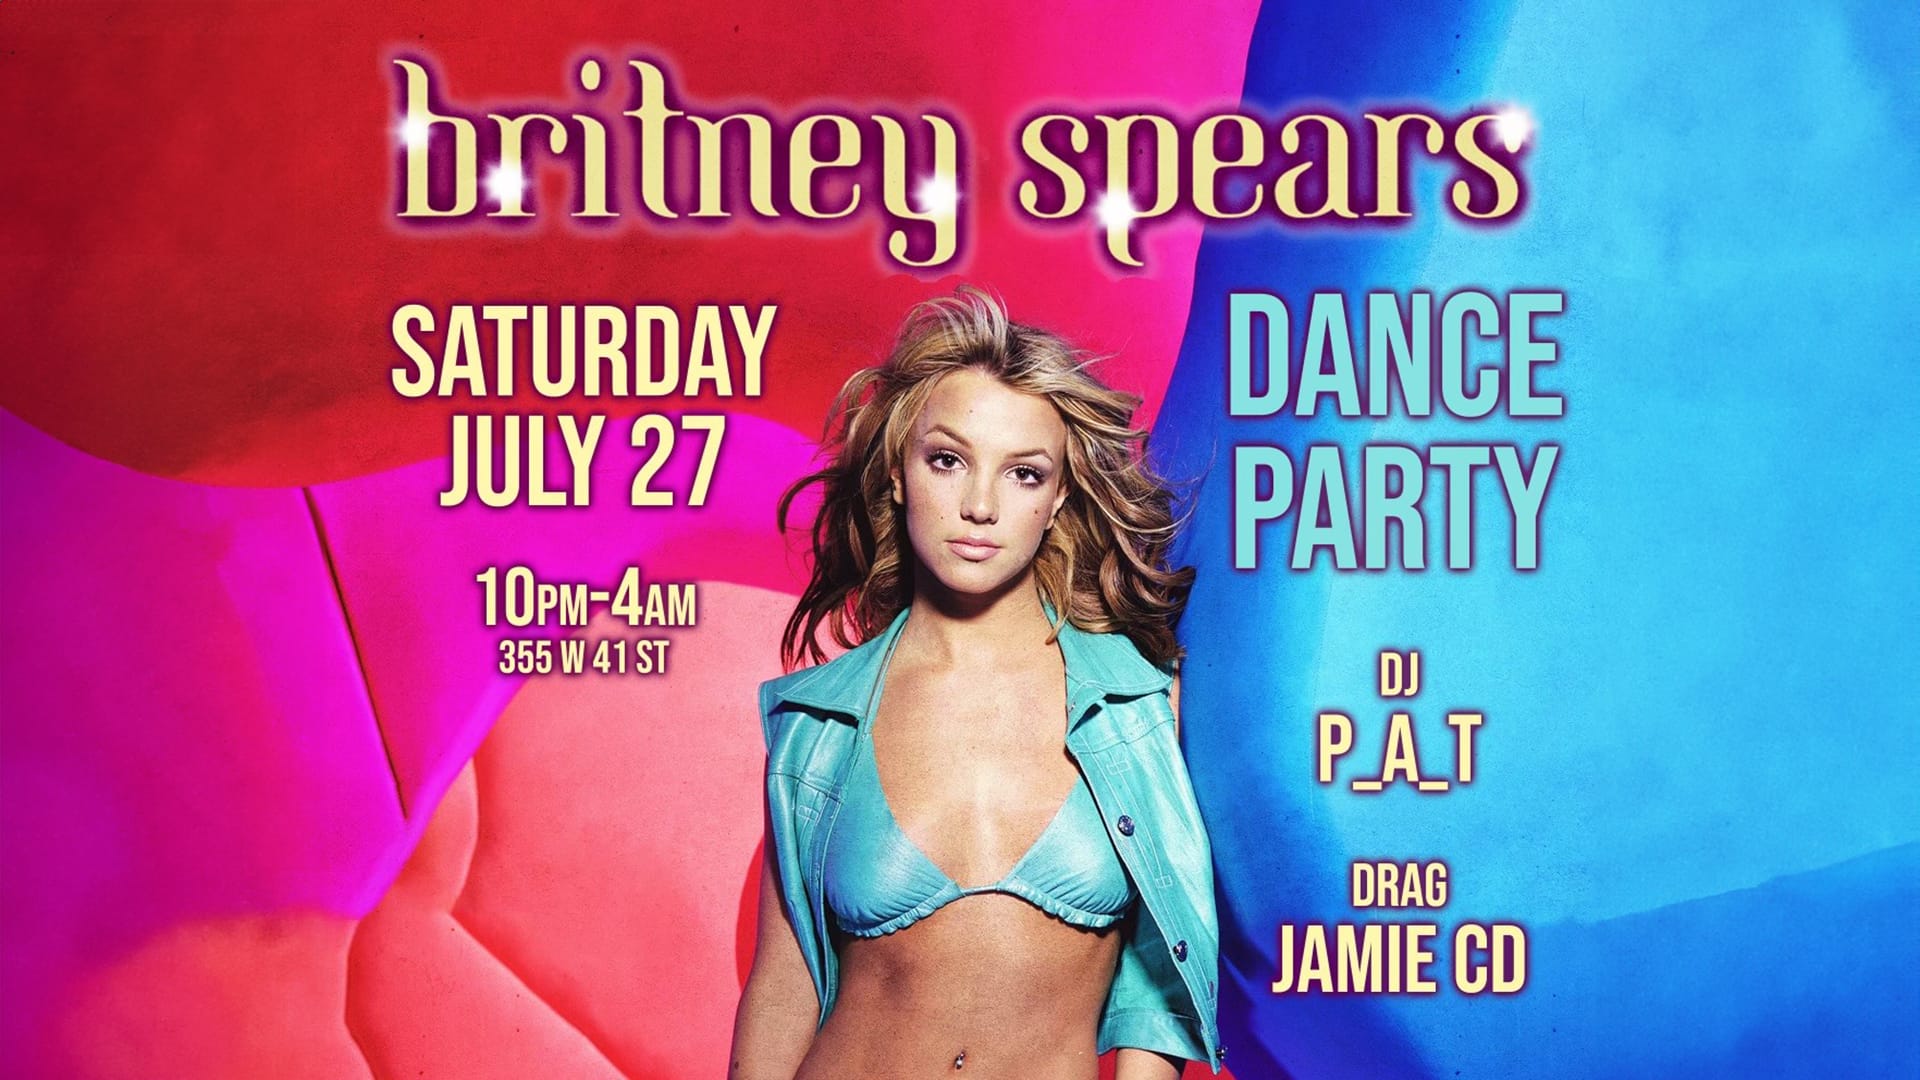 britney Dance Party